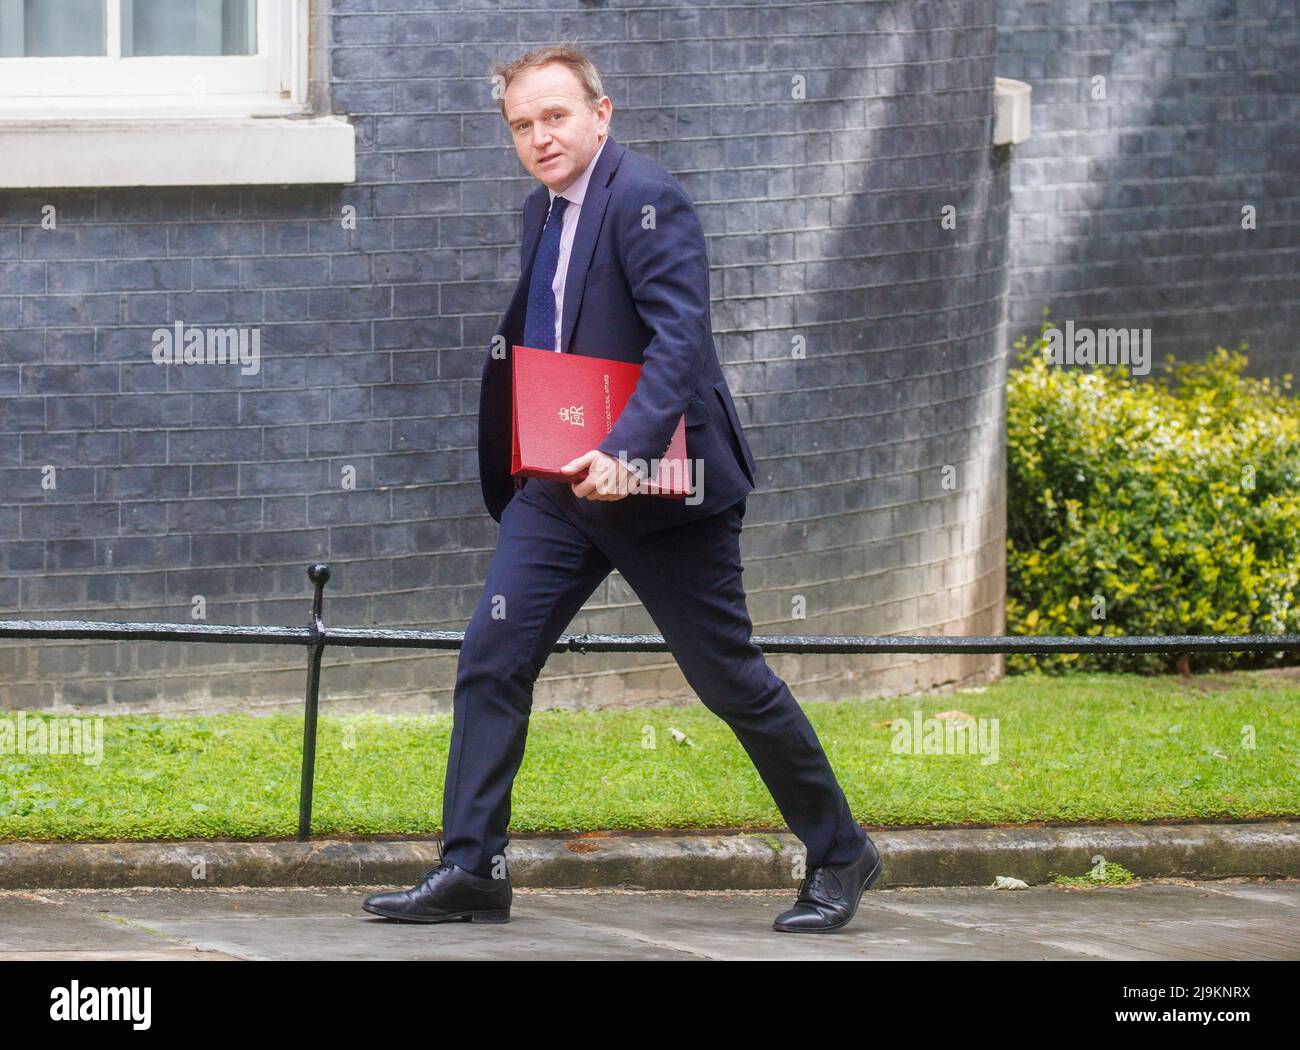 London, UK. 24th May, 2022. George Eustice, Secretary of State for Environment, Food and Rural Affairs, arrives for the Cabinet meeting. The Government is under pressure with new photos emerging of the Prime Minister drinking. Credit: Mark Thomas/Alamy Live News Stock Photo